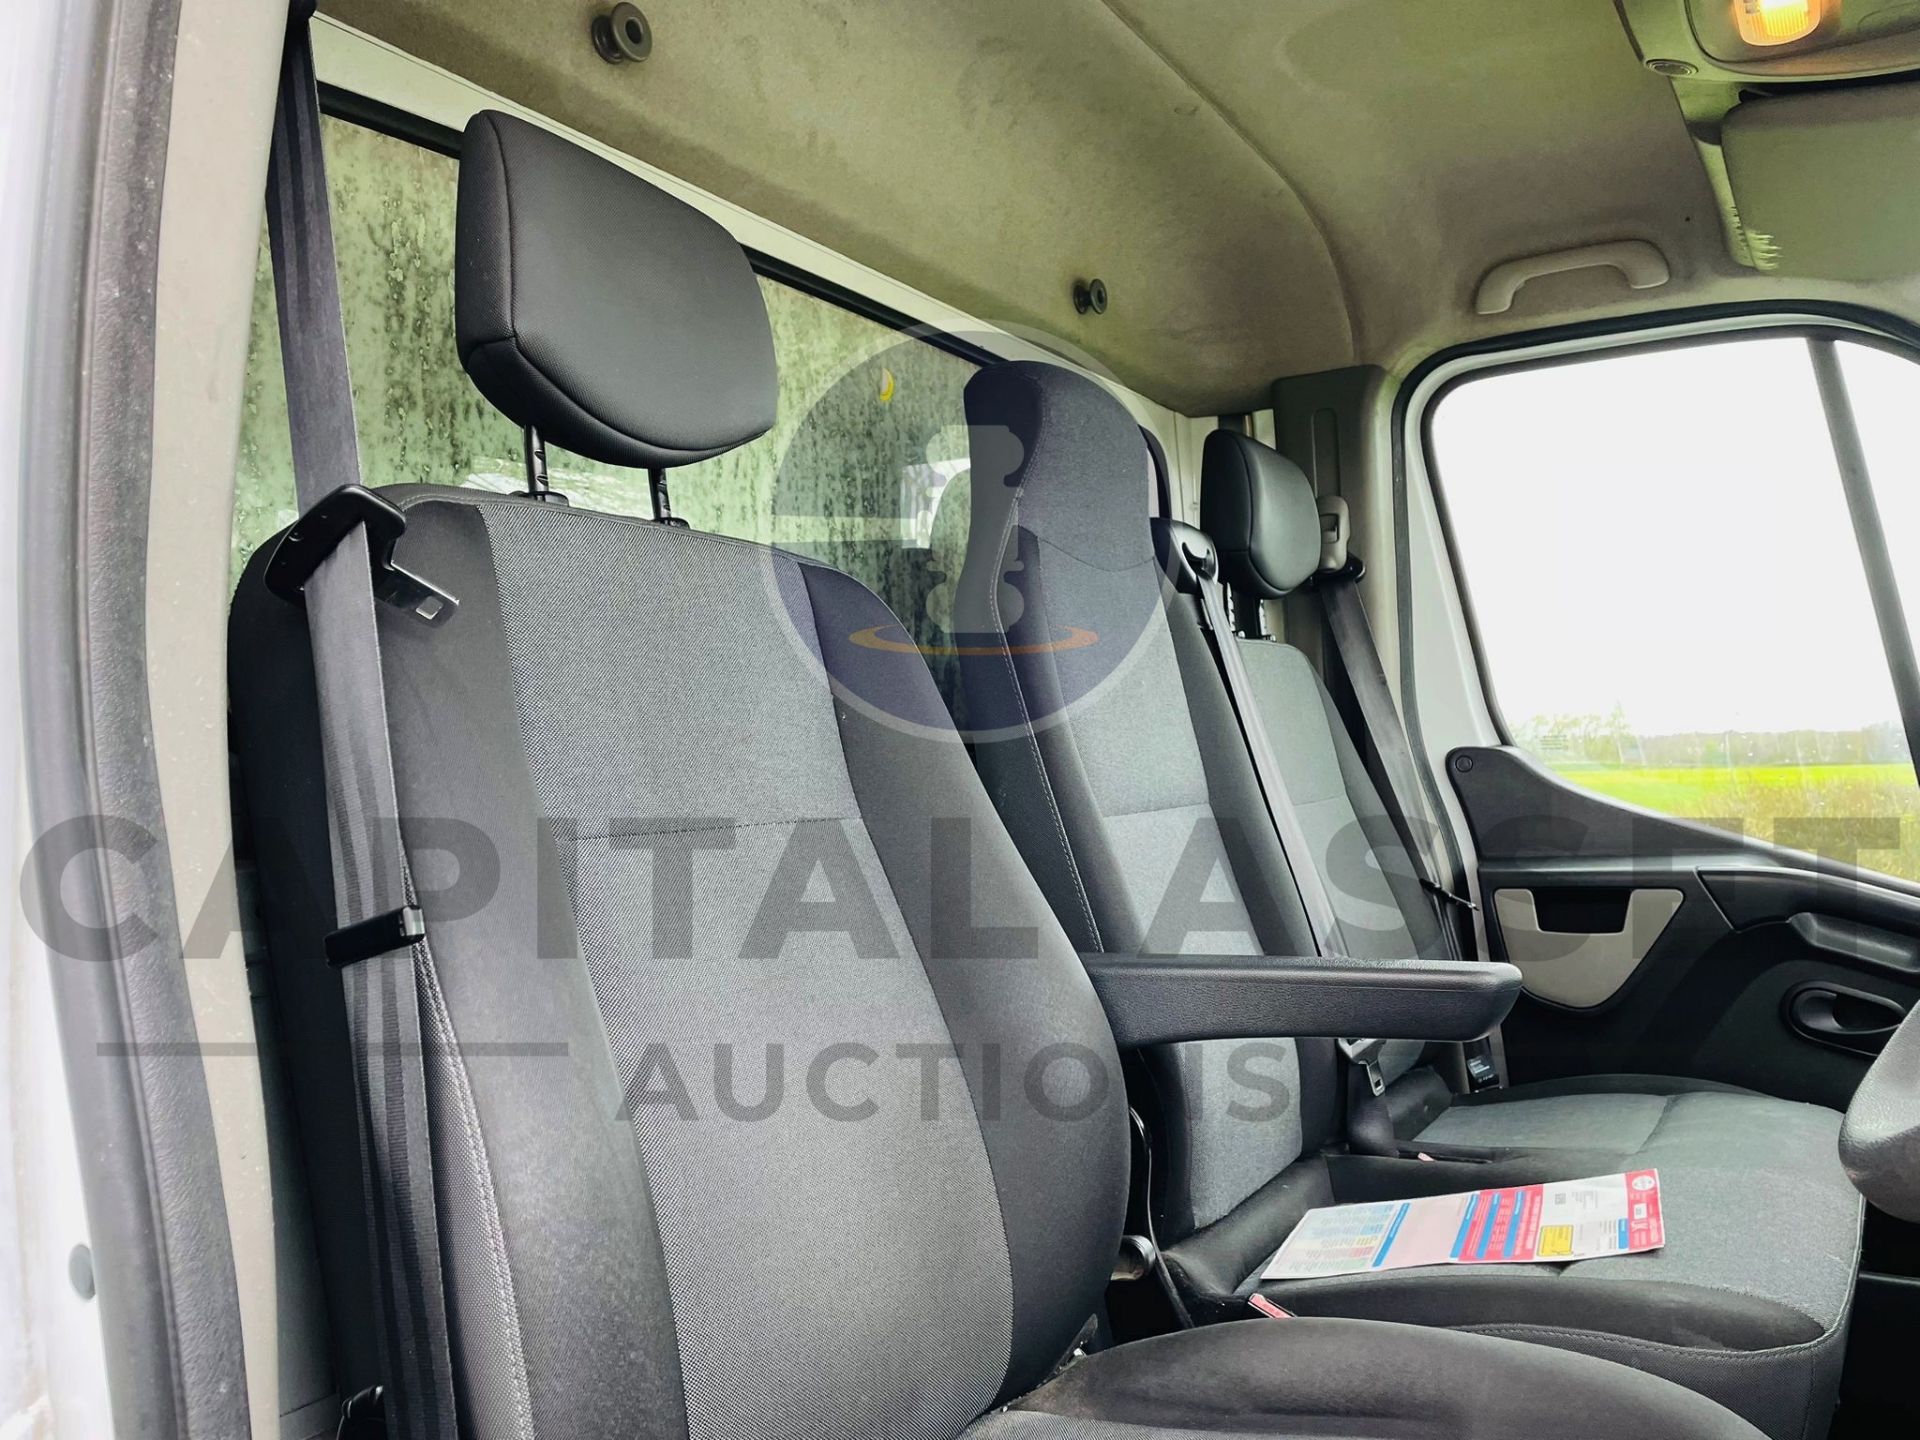 RENAULT MASTER 2.3 DCI 130 BUSINESS EDITION LWB (LUTON / BOX VAN) - 2019 MODEL - EURO 6 - TAIL LIFT! - Image 12 of 19